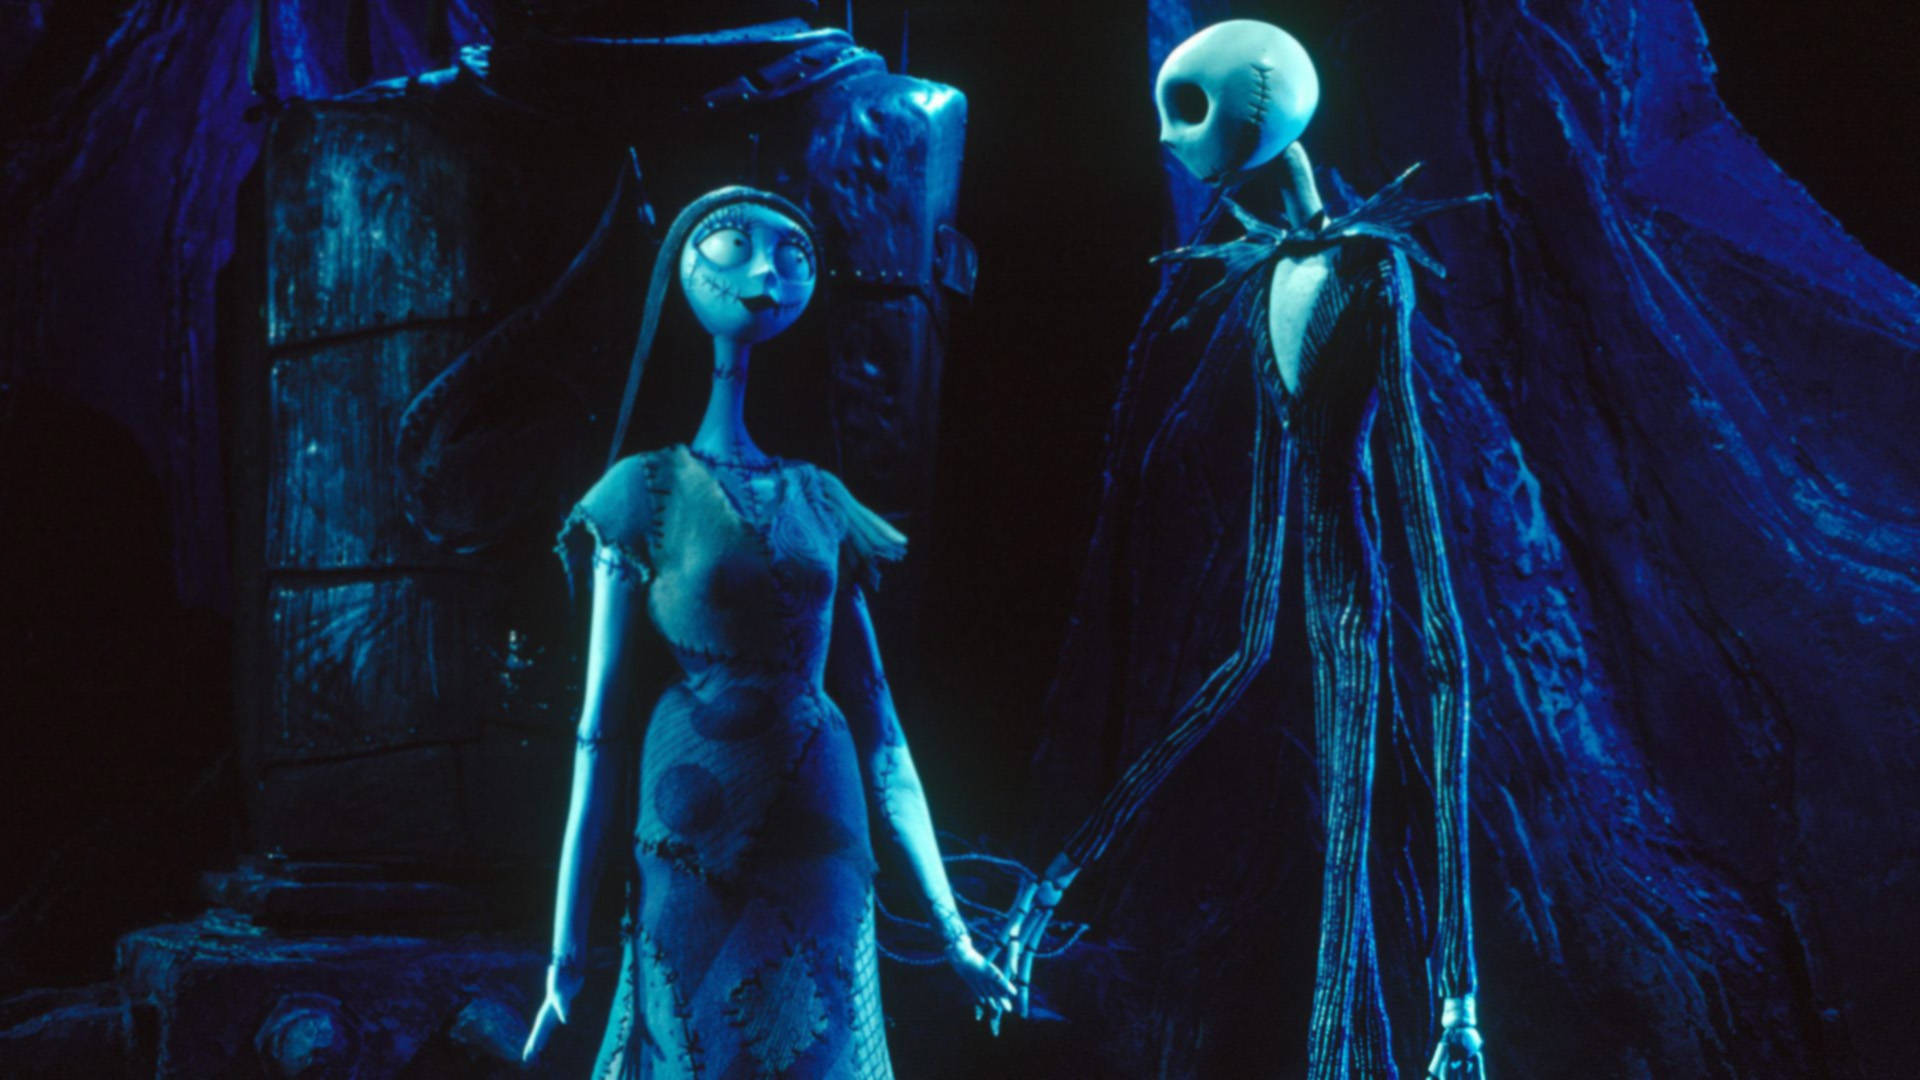 Enchanting Illustration Of Jack And Sally From Tim Burton's Masterpiece Background